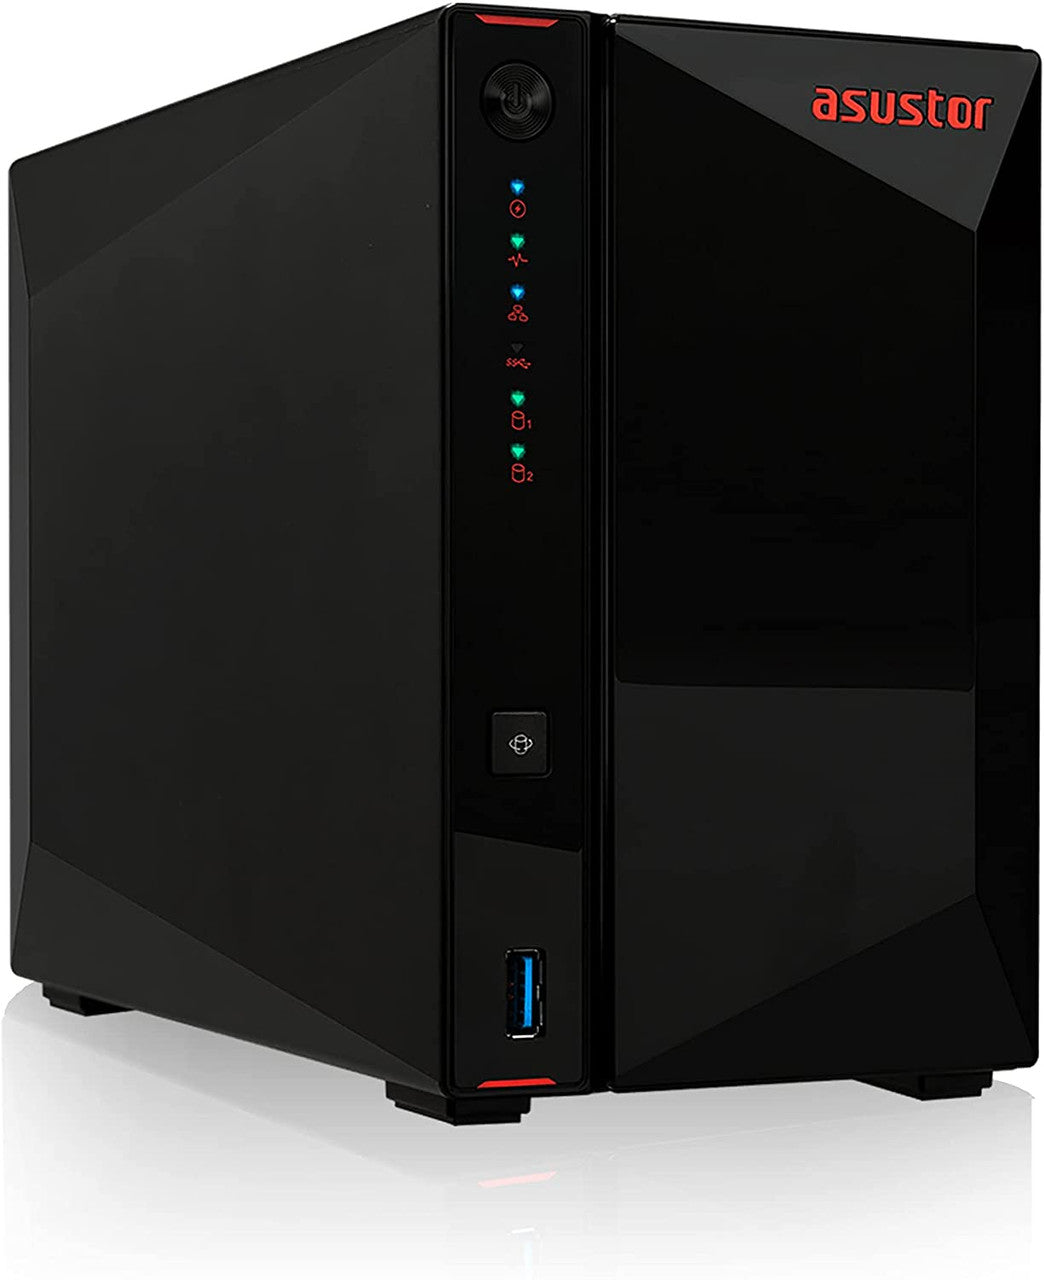 Asustor AS5202T 2-Bay Nimbustor 2 NAS with 2GB RAM and 12TB (2 x 6TB) Western Digital RED Plus Drives Fully Assembled and Tested